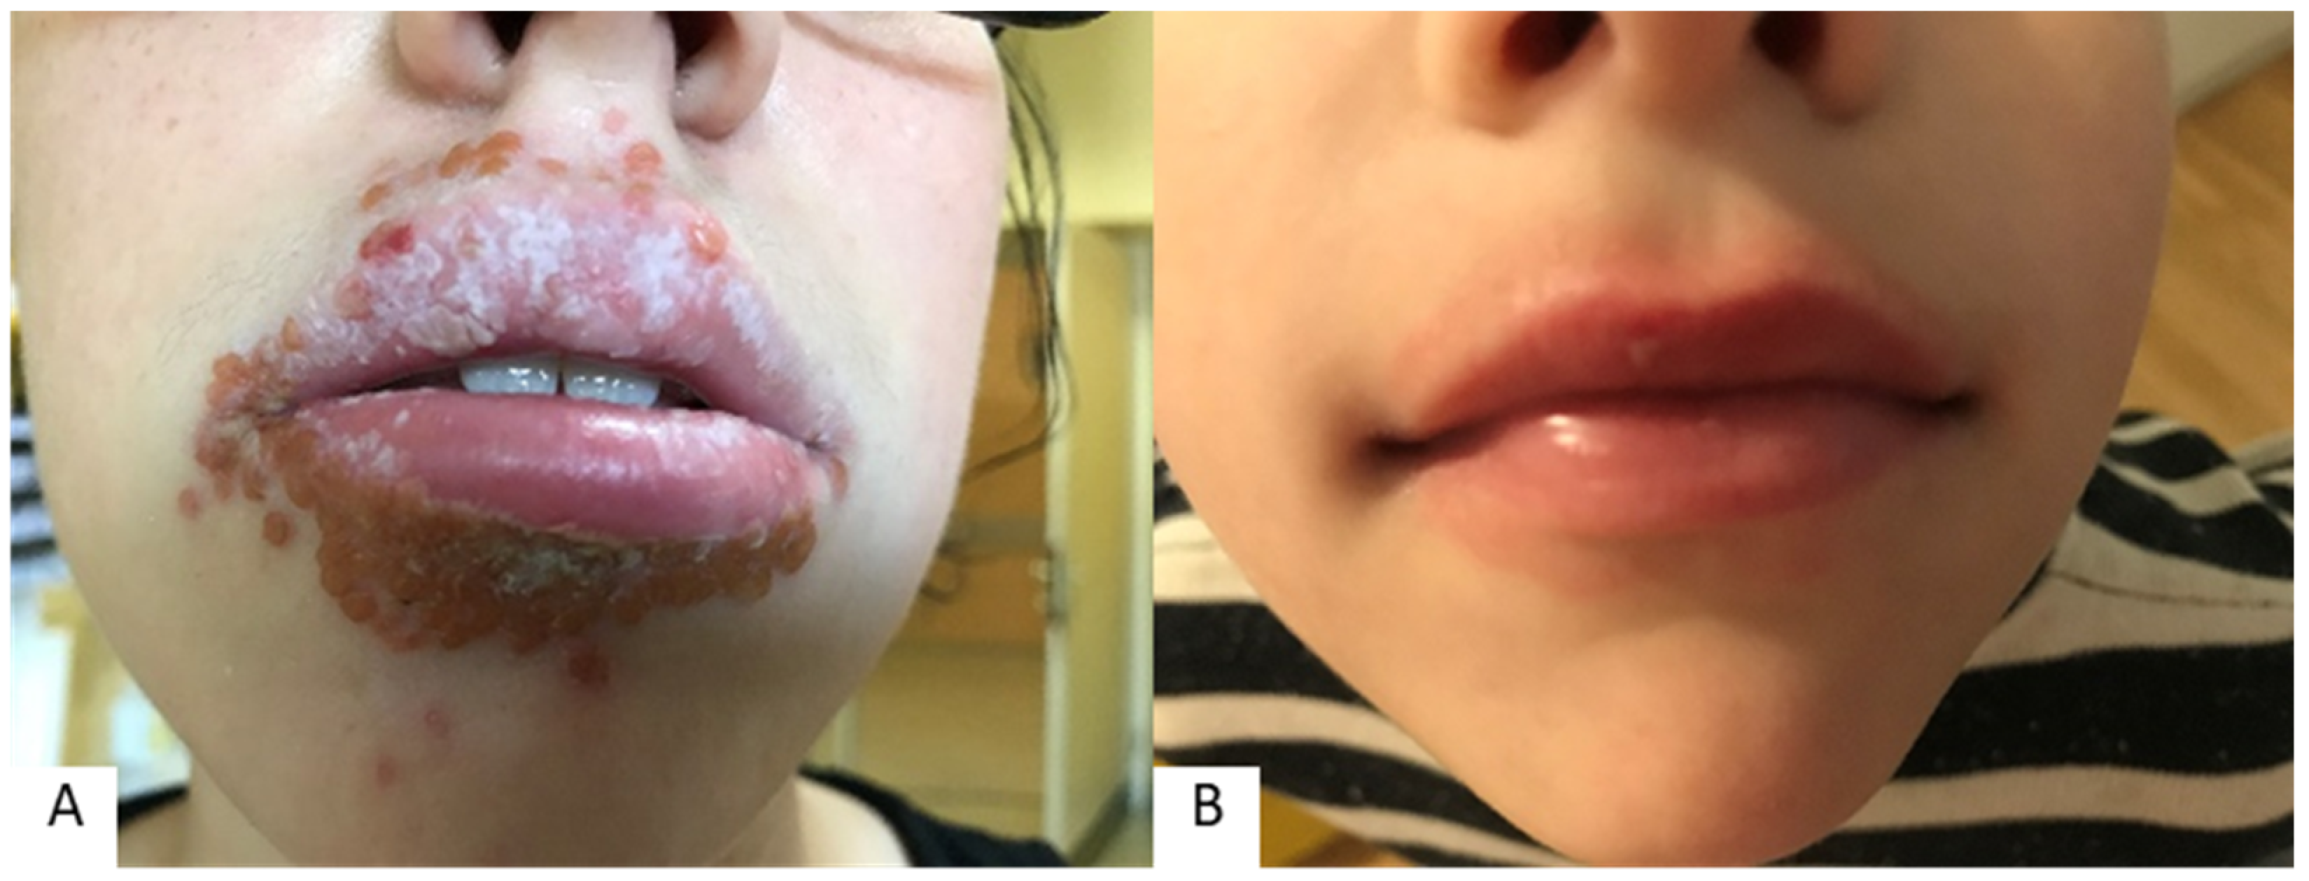 Swollen Lip Tattoo: What You Need to Know Before Considering a Lip Tattoo –  Beauty and Nails